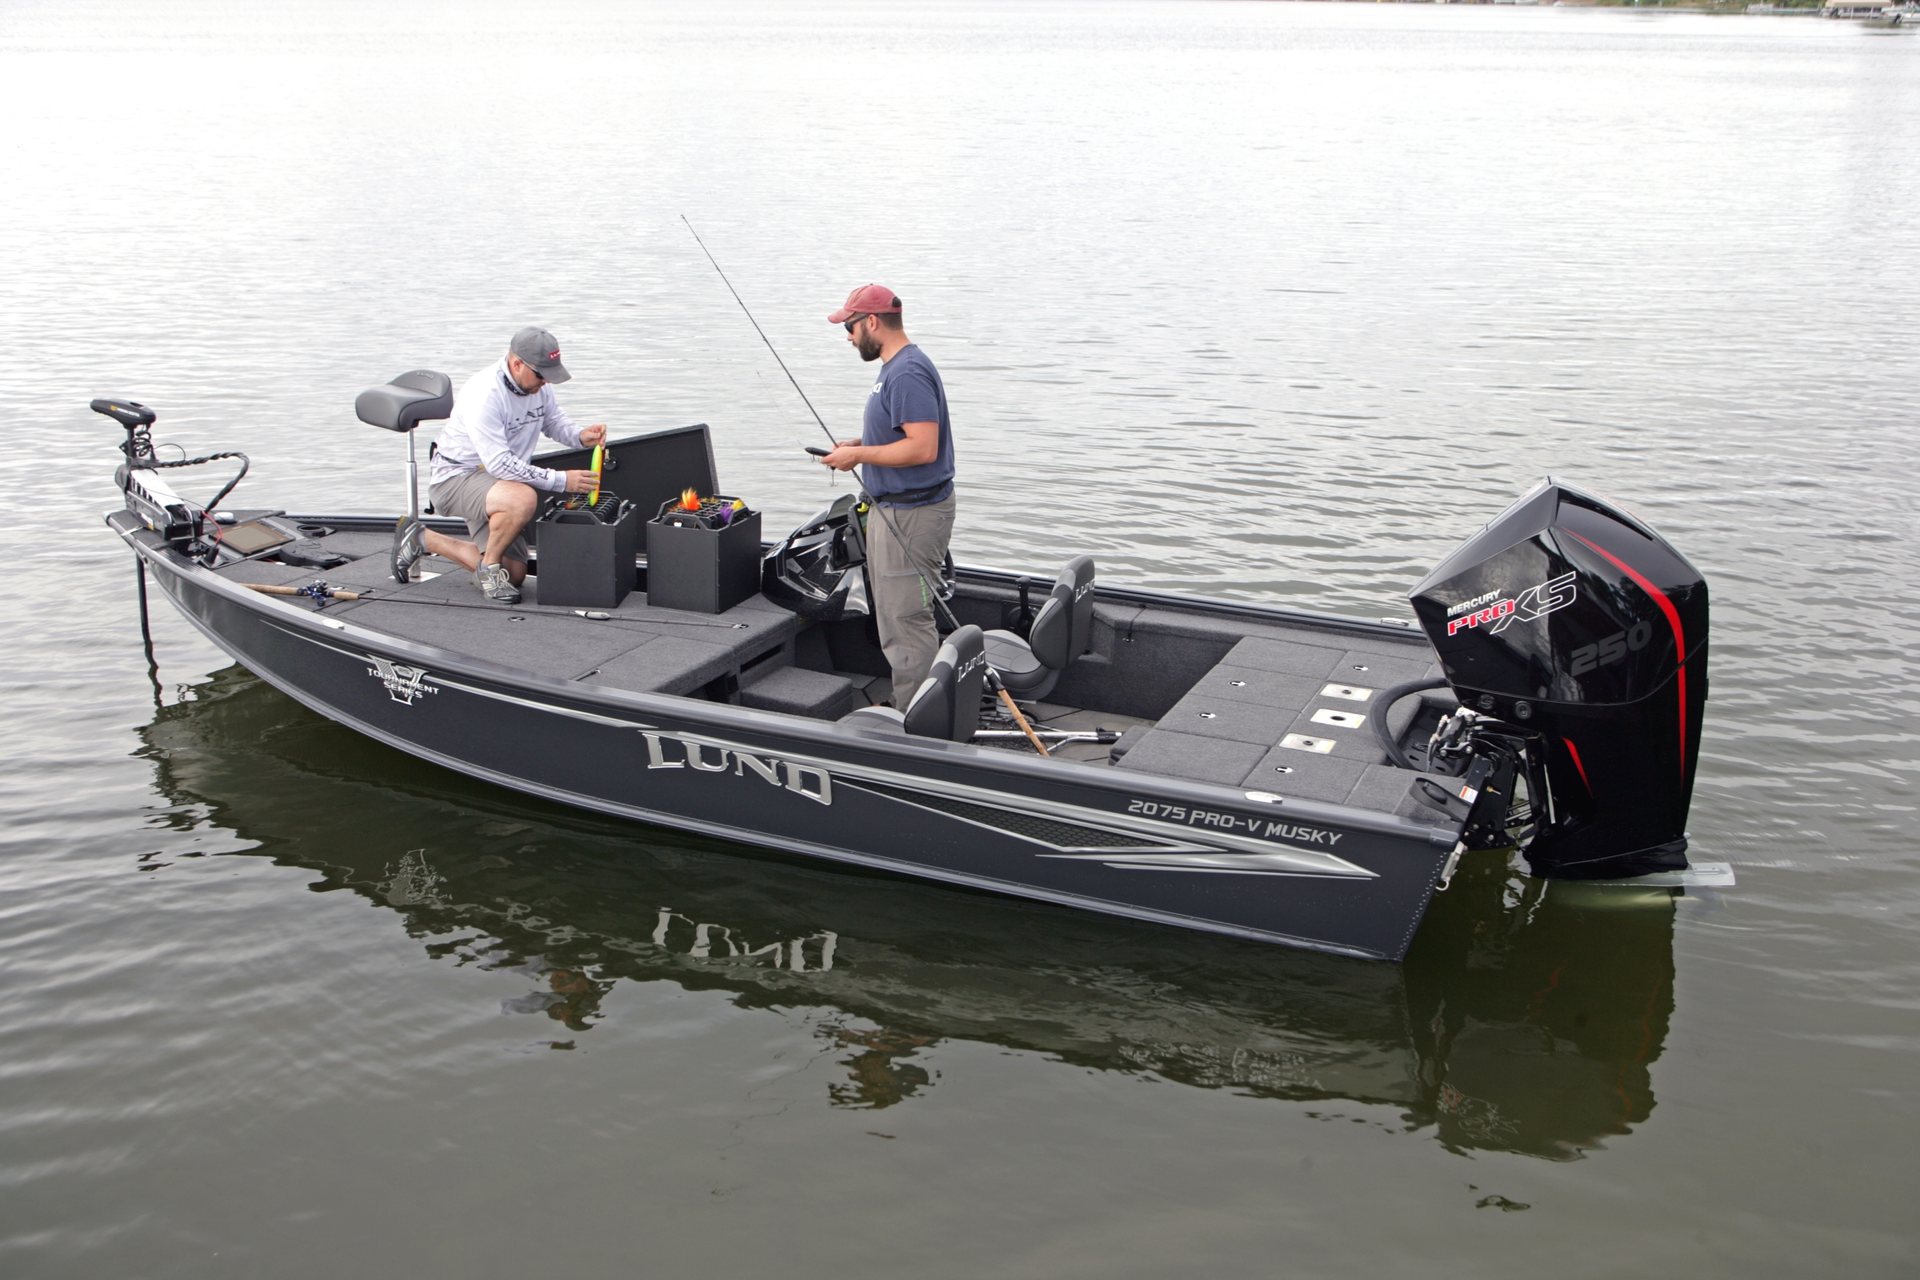 360 VR Virtual Tours of the Lund 2075 Pro-V Musky XS